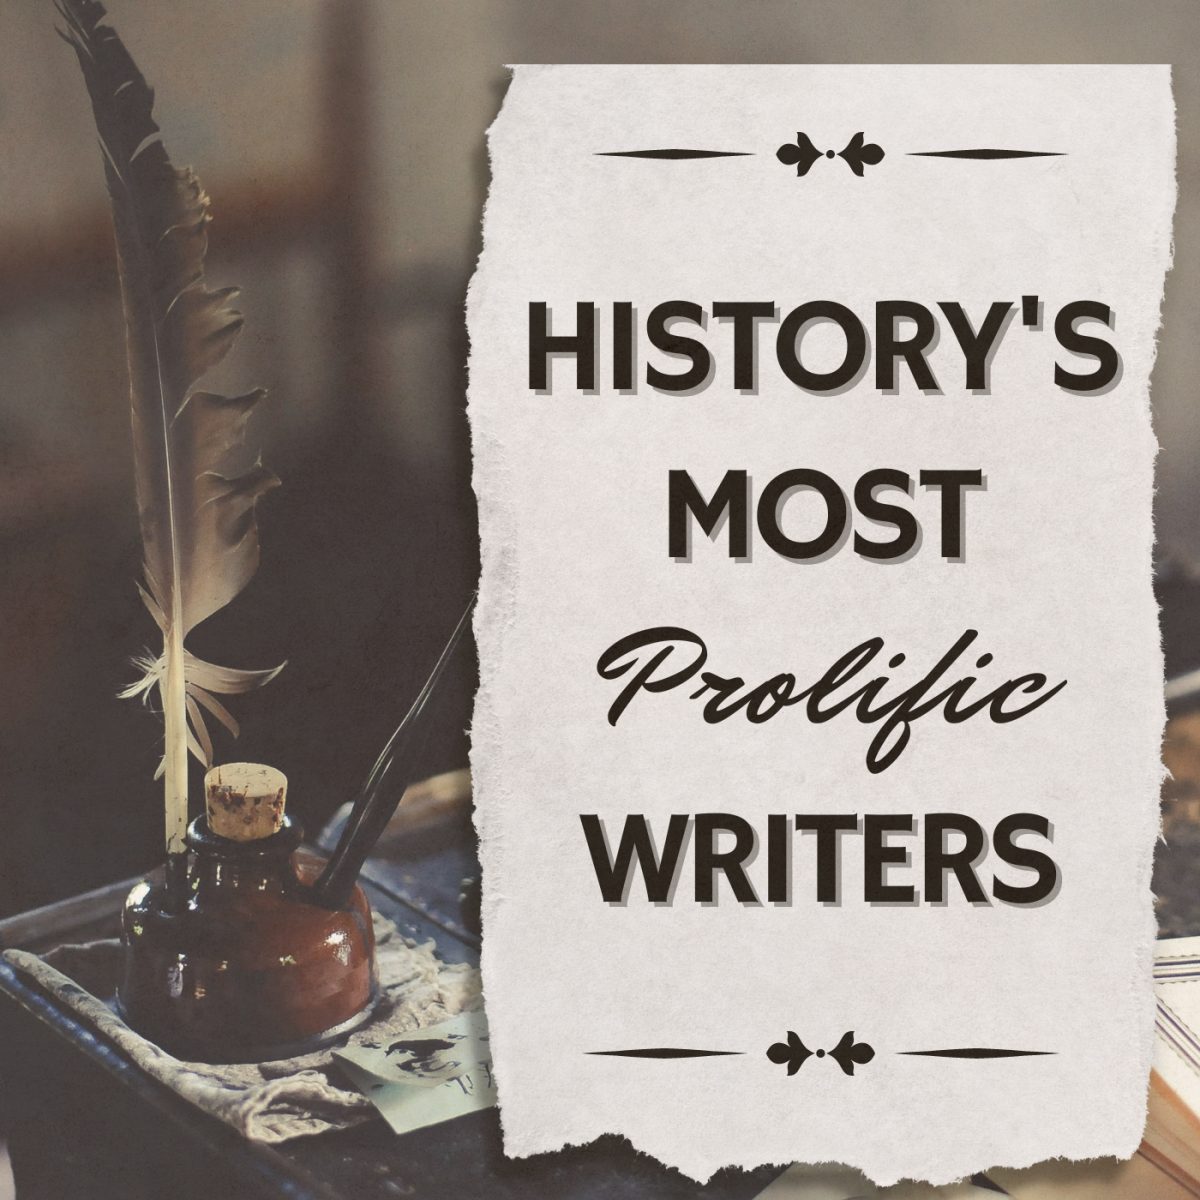 The Top 21 Most Prolific Writers of All Time